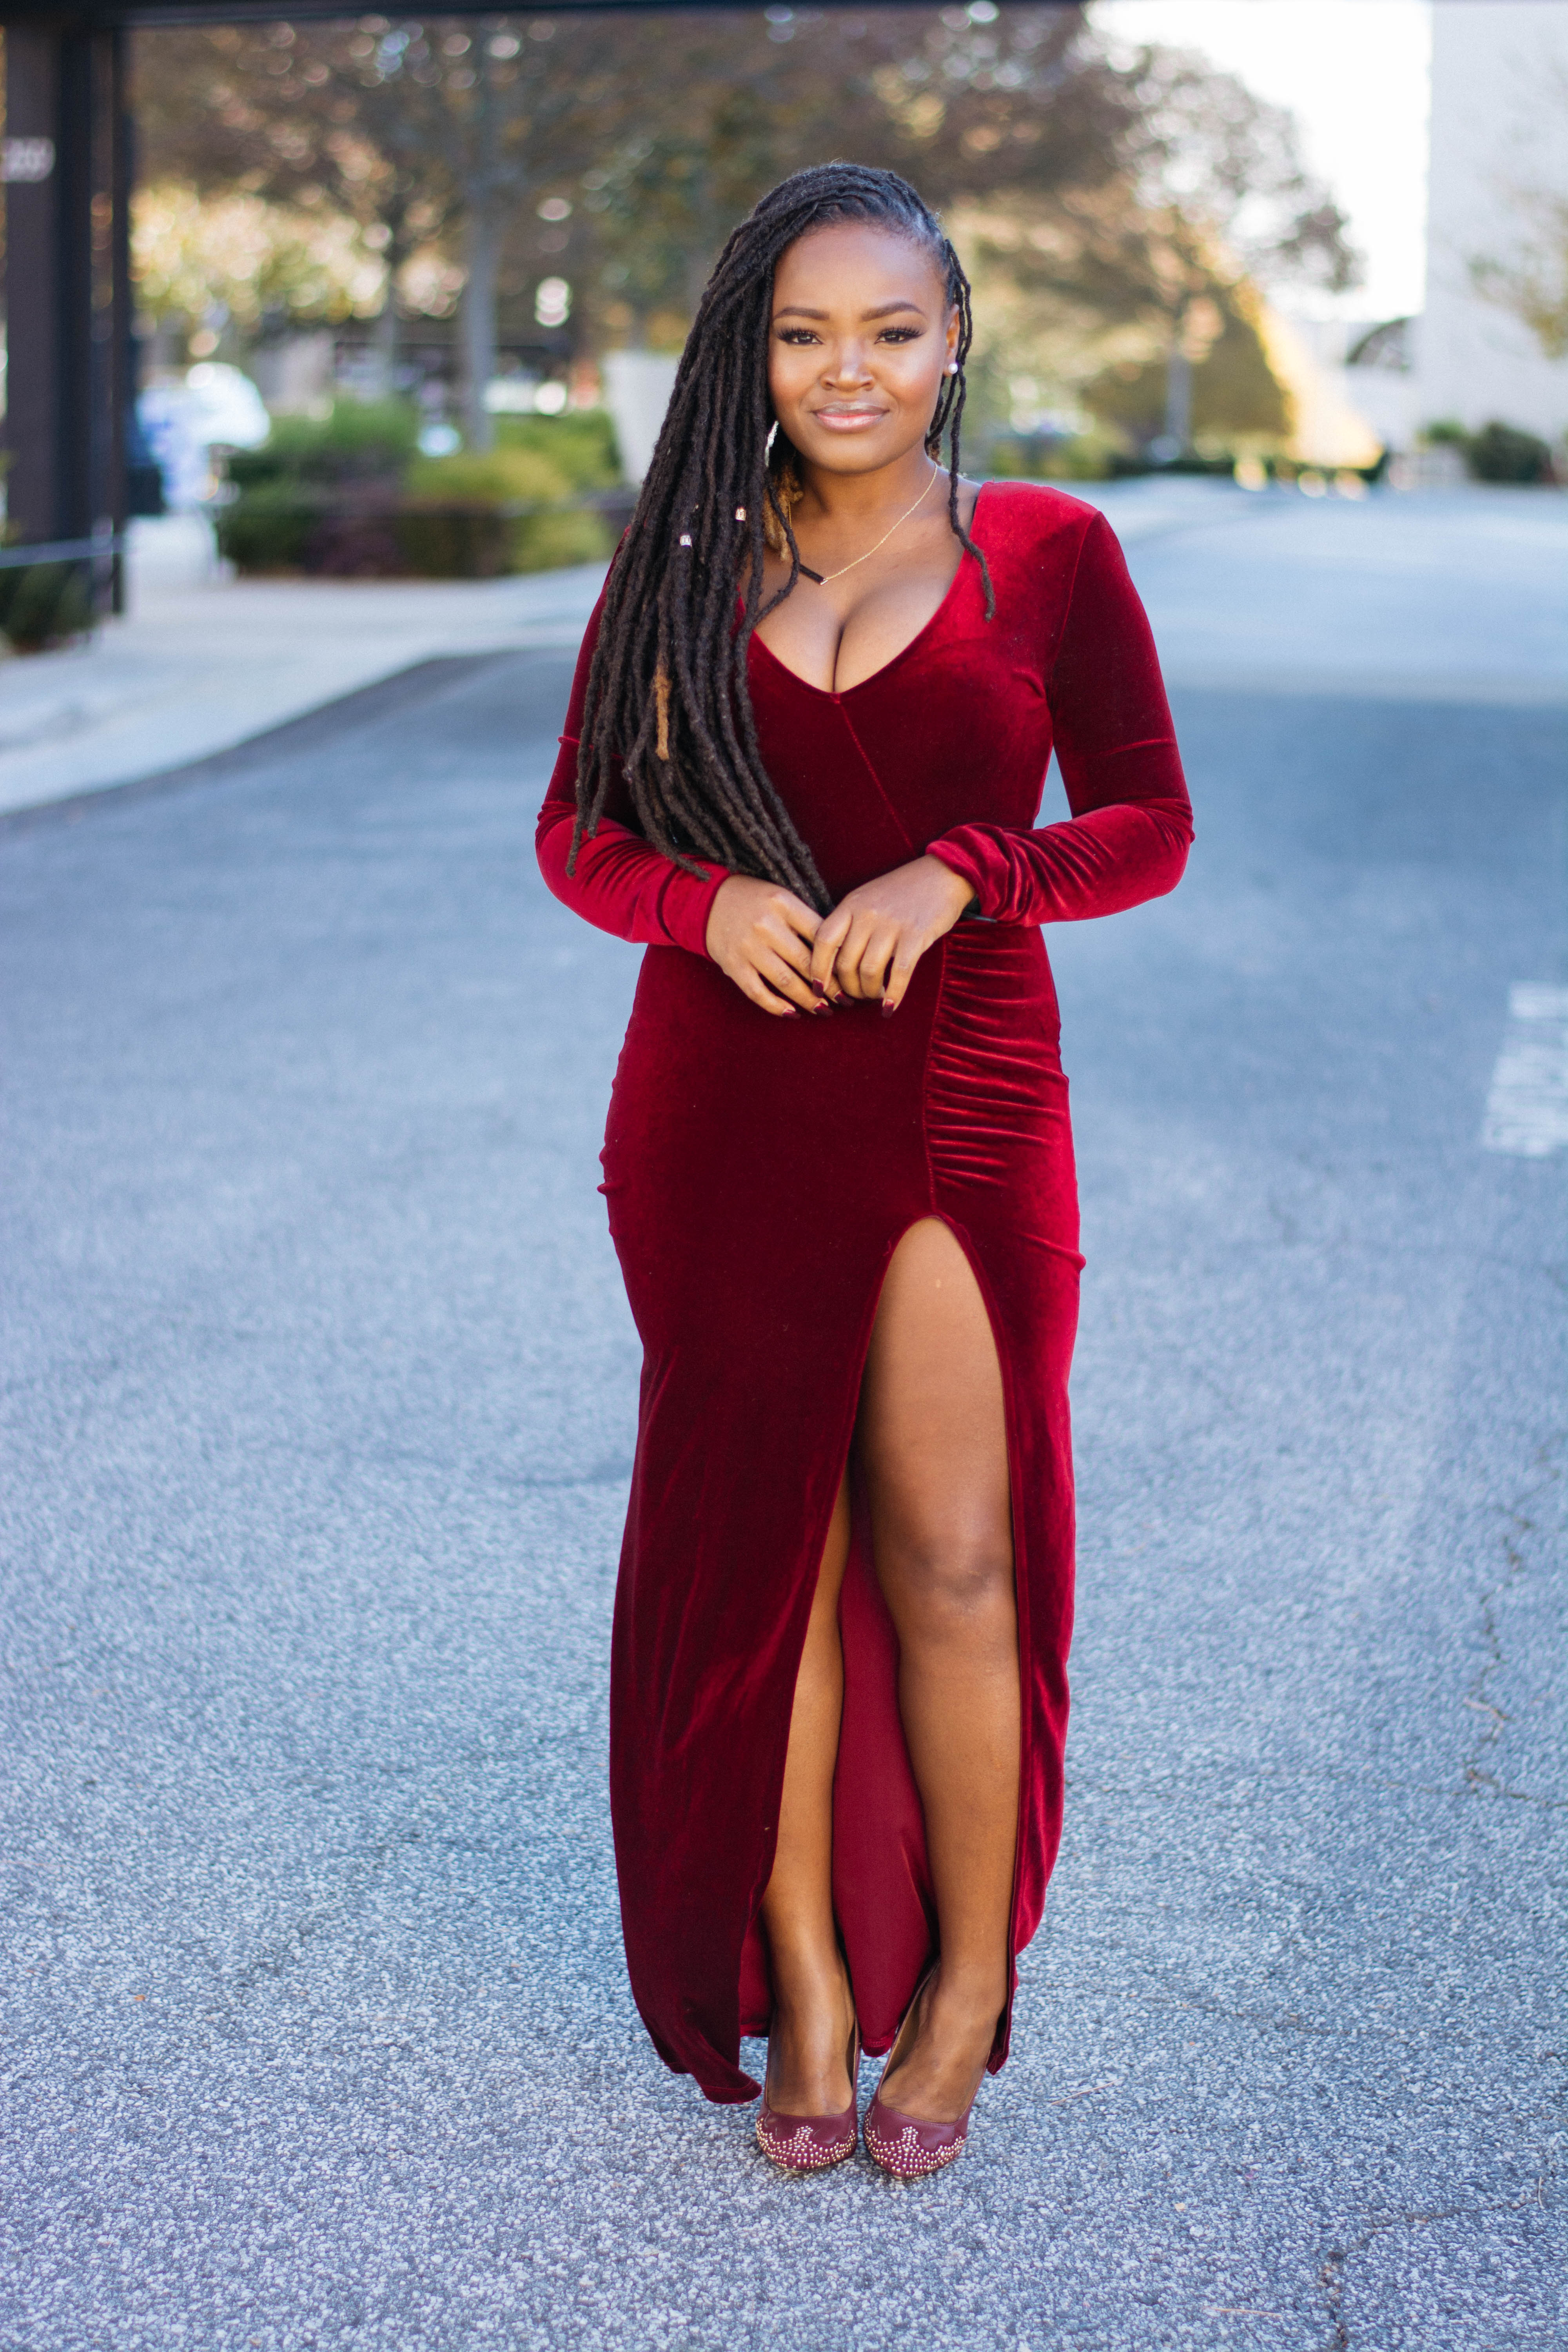 5 New Years Eve Looks for Less than $55 from Fashion Nova 